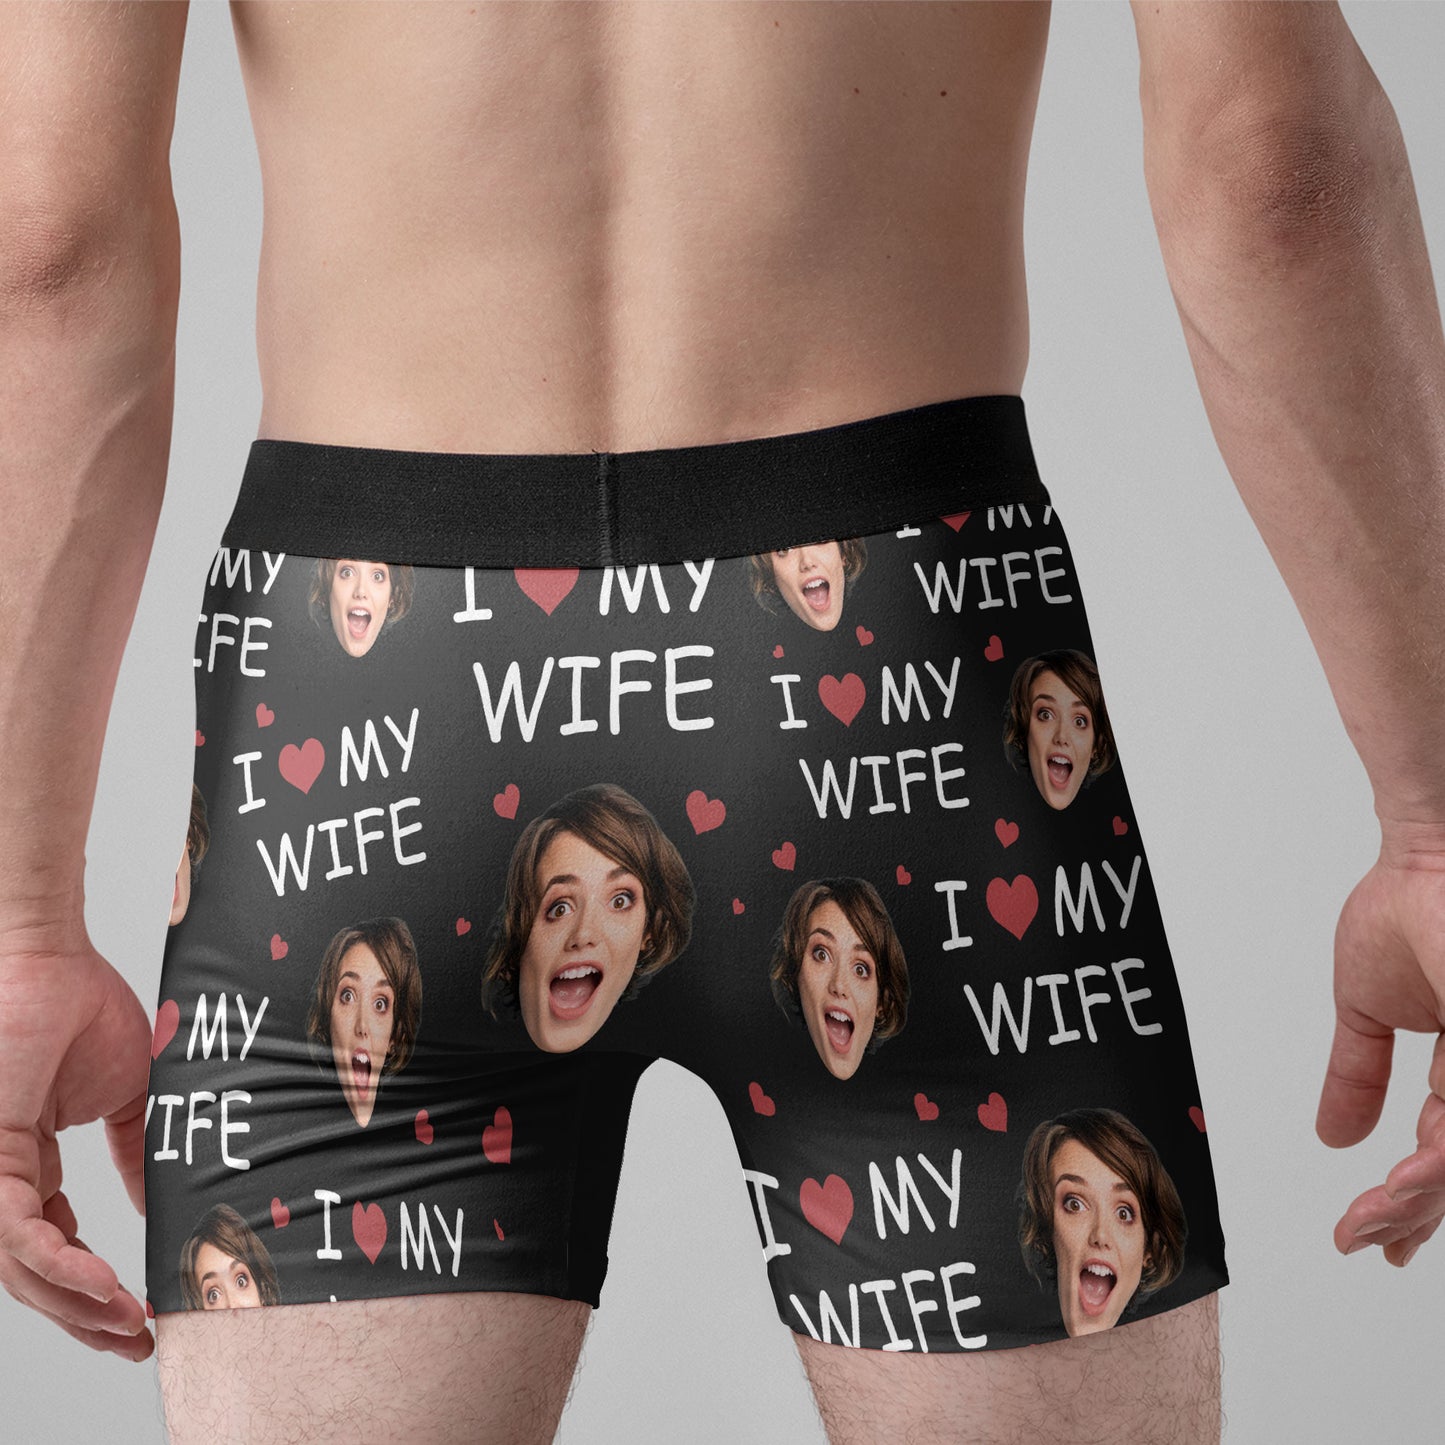 I Love My Wife - Personalized Photo Men's Boxer Briefs - Anniversary Gifts  For Men, Husband, Him